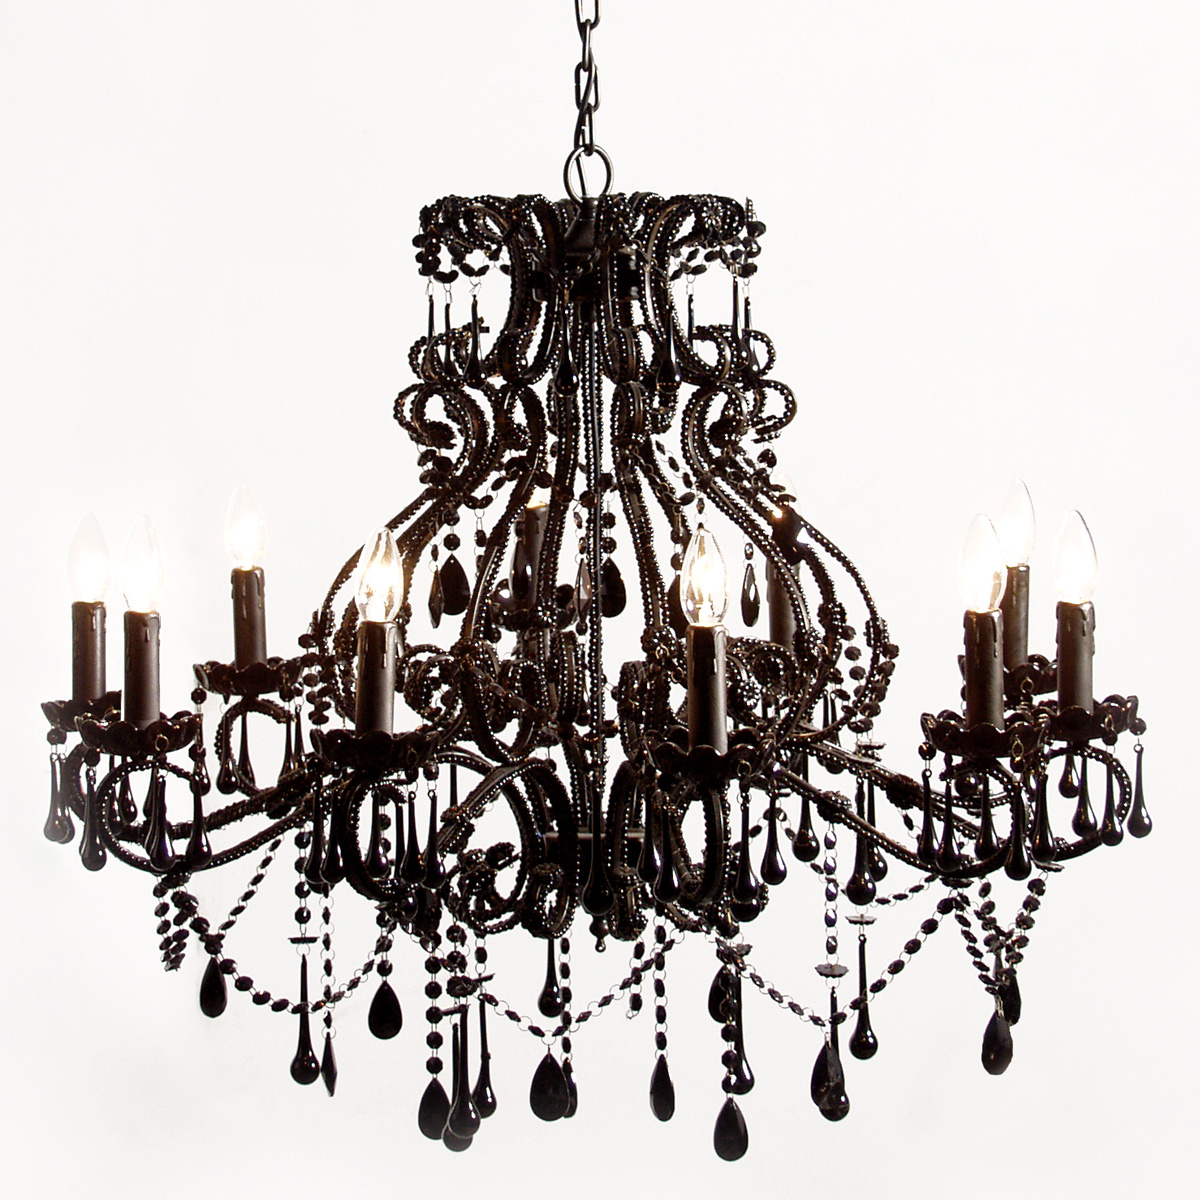 Sassy Boo Black Chandelier Image By The French Bedroom Pany